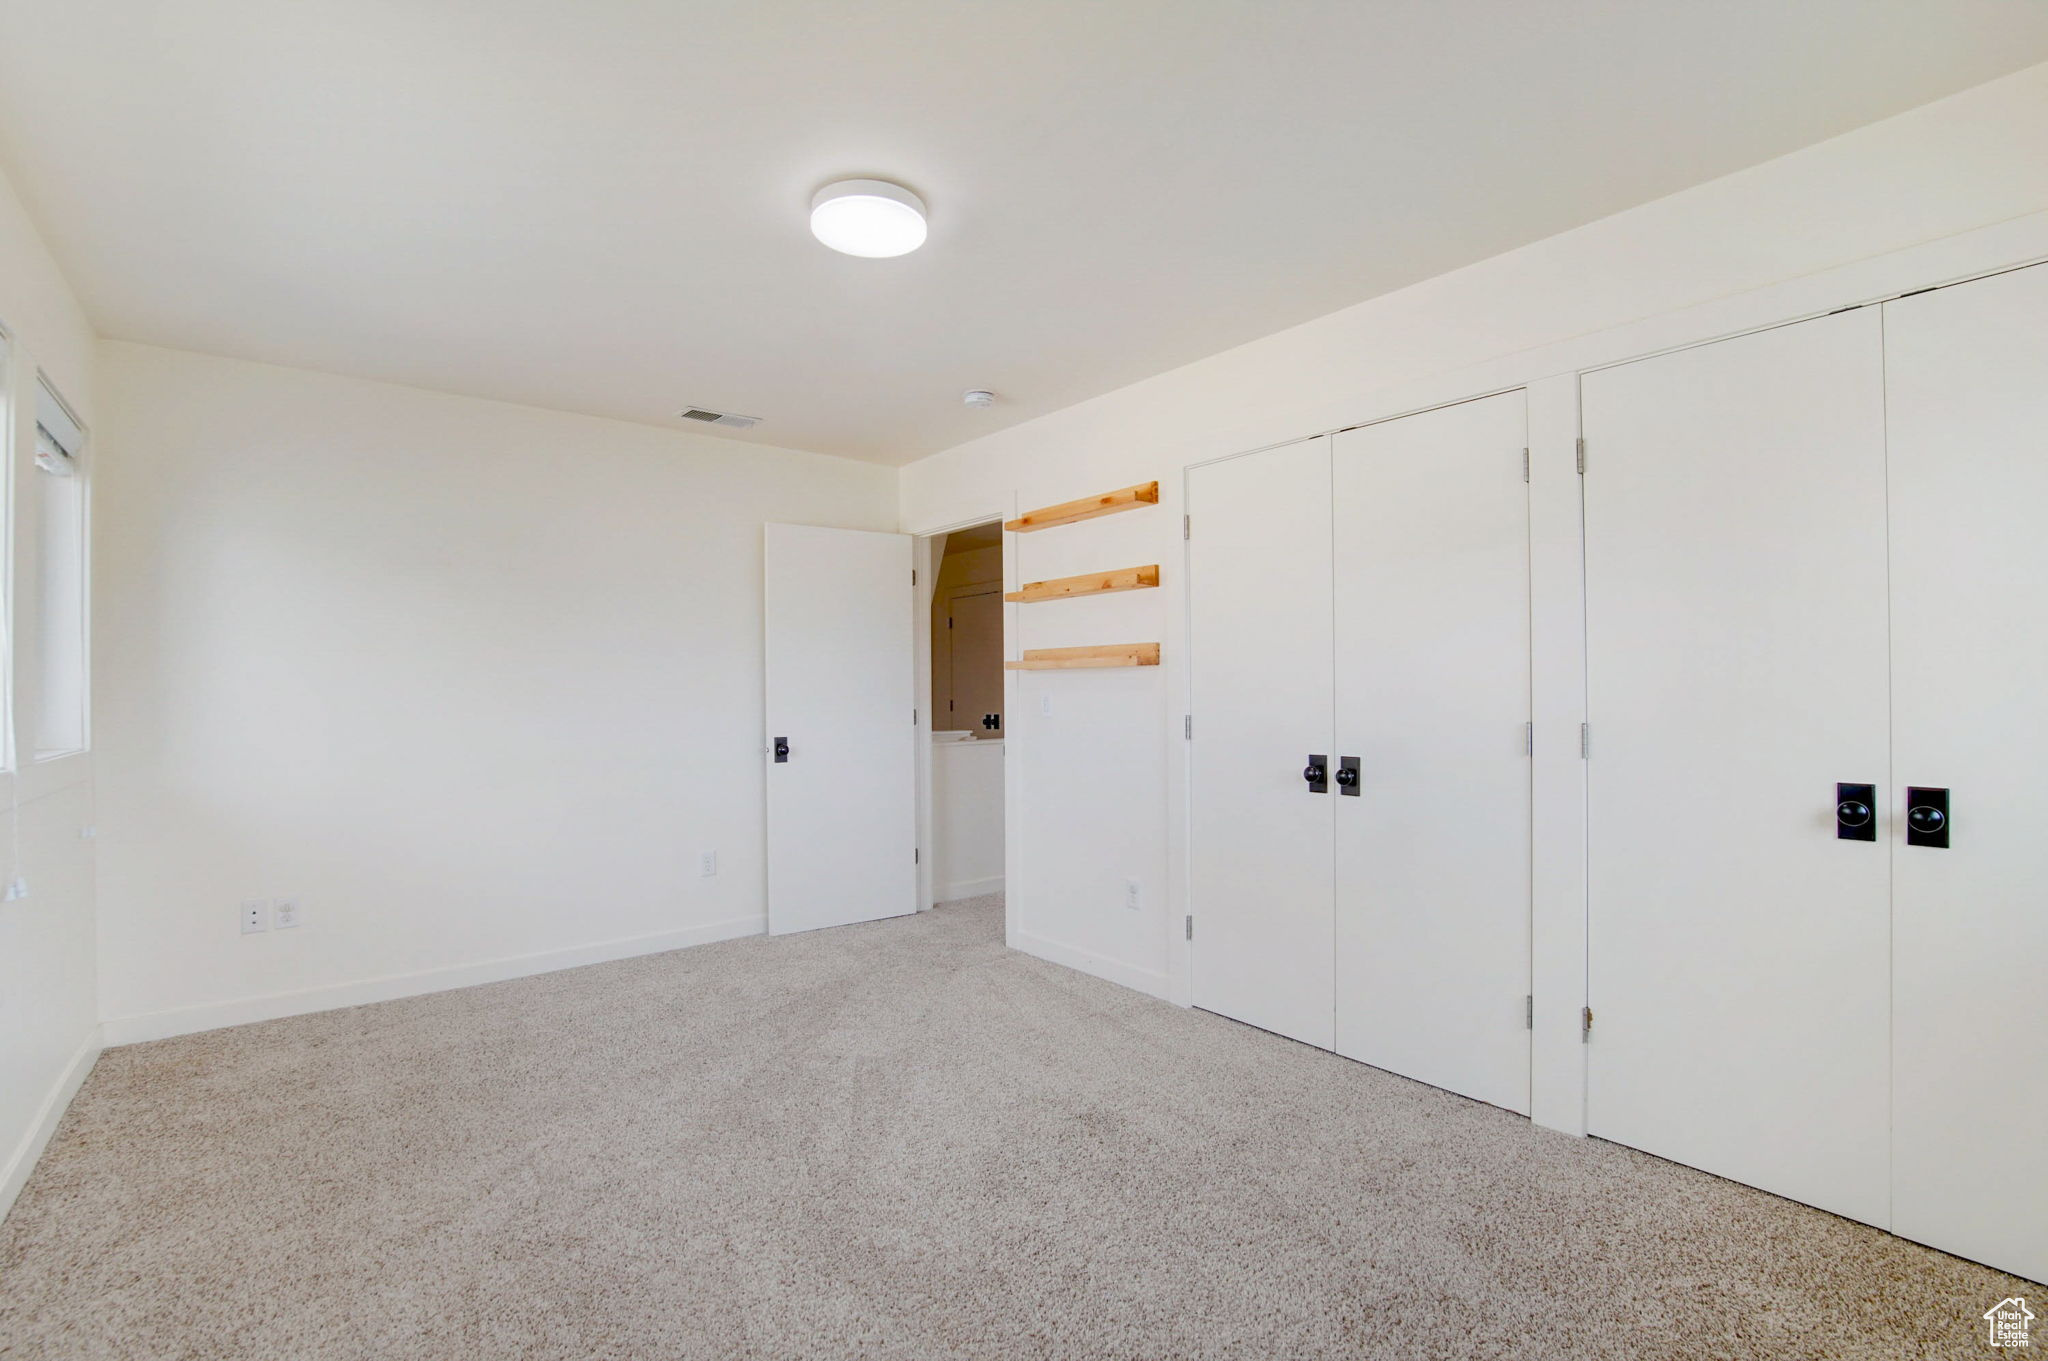 Unfurnished bedroom featuring multiple closets and carpet